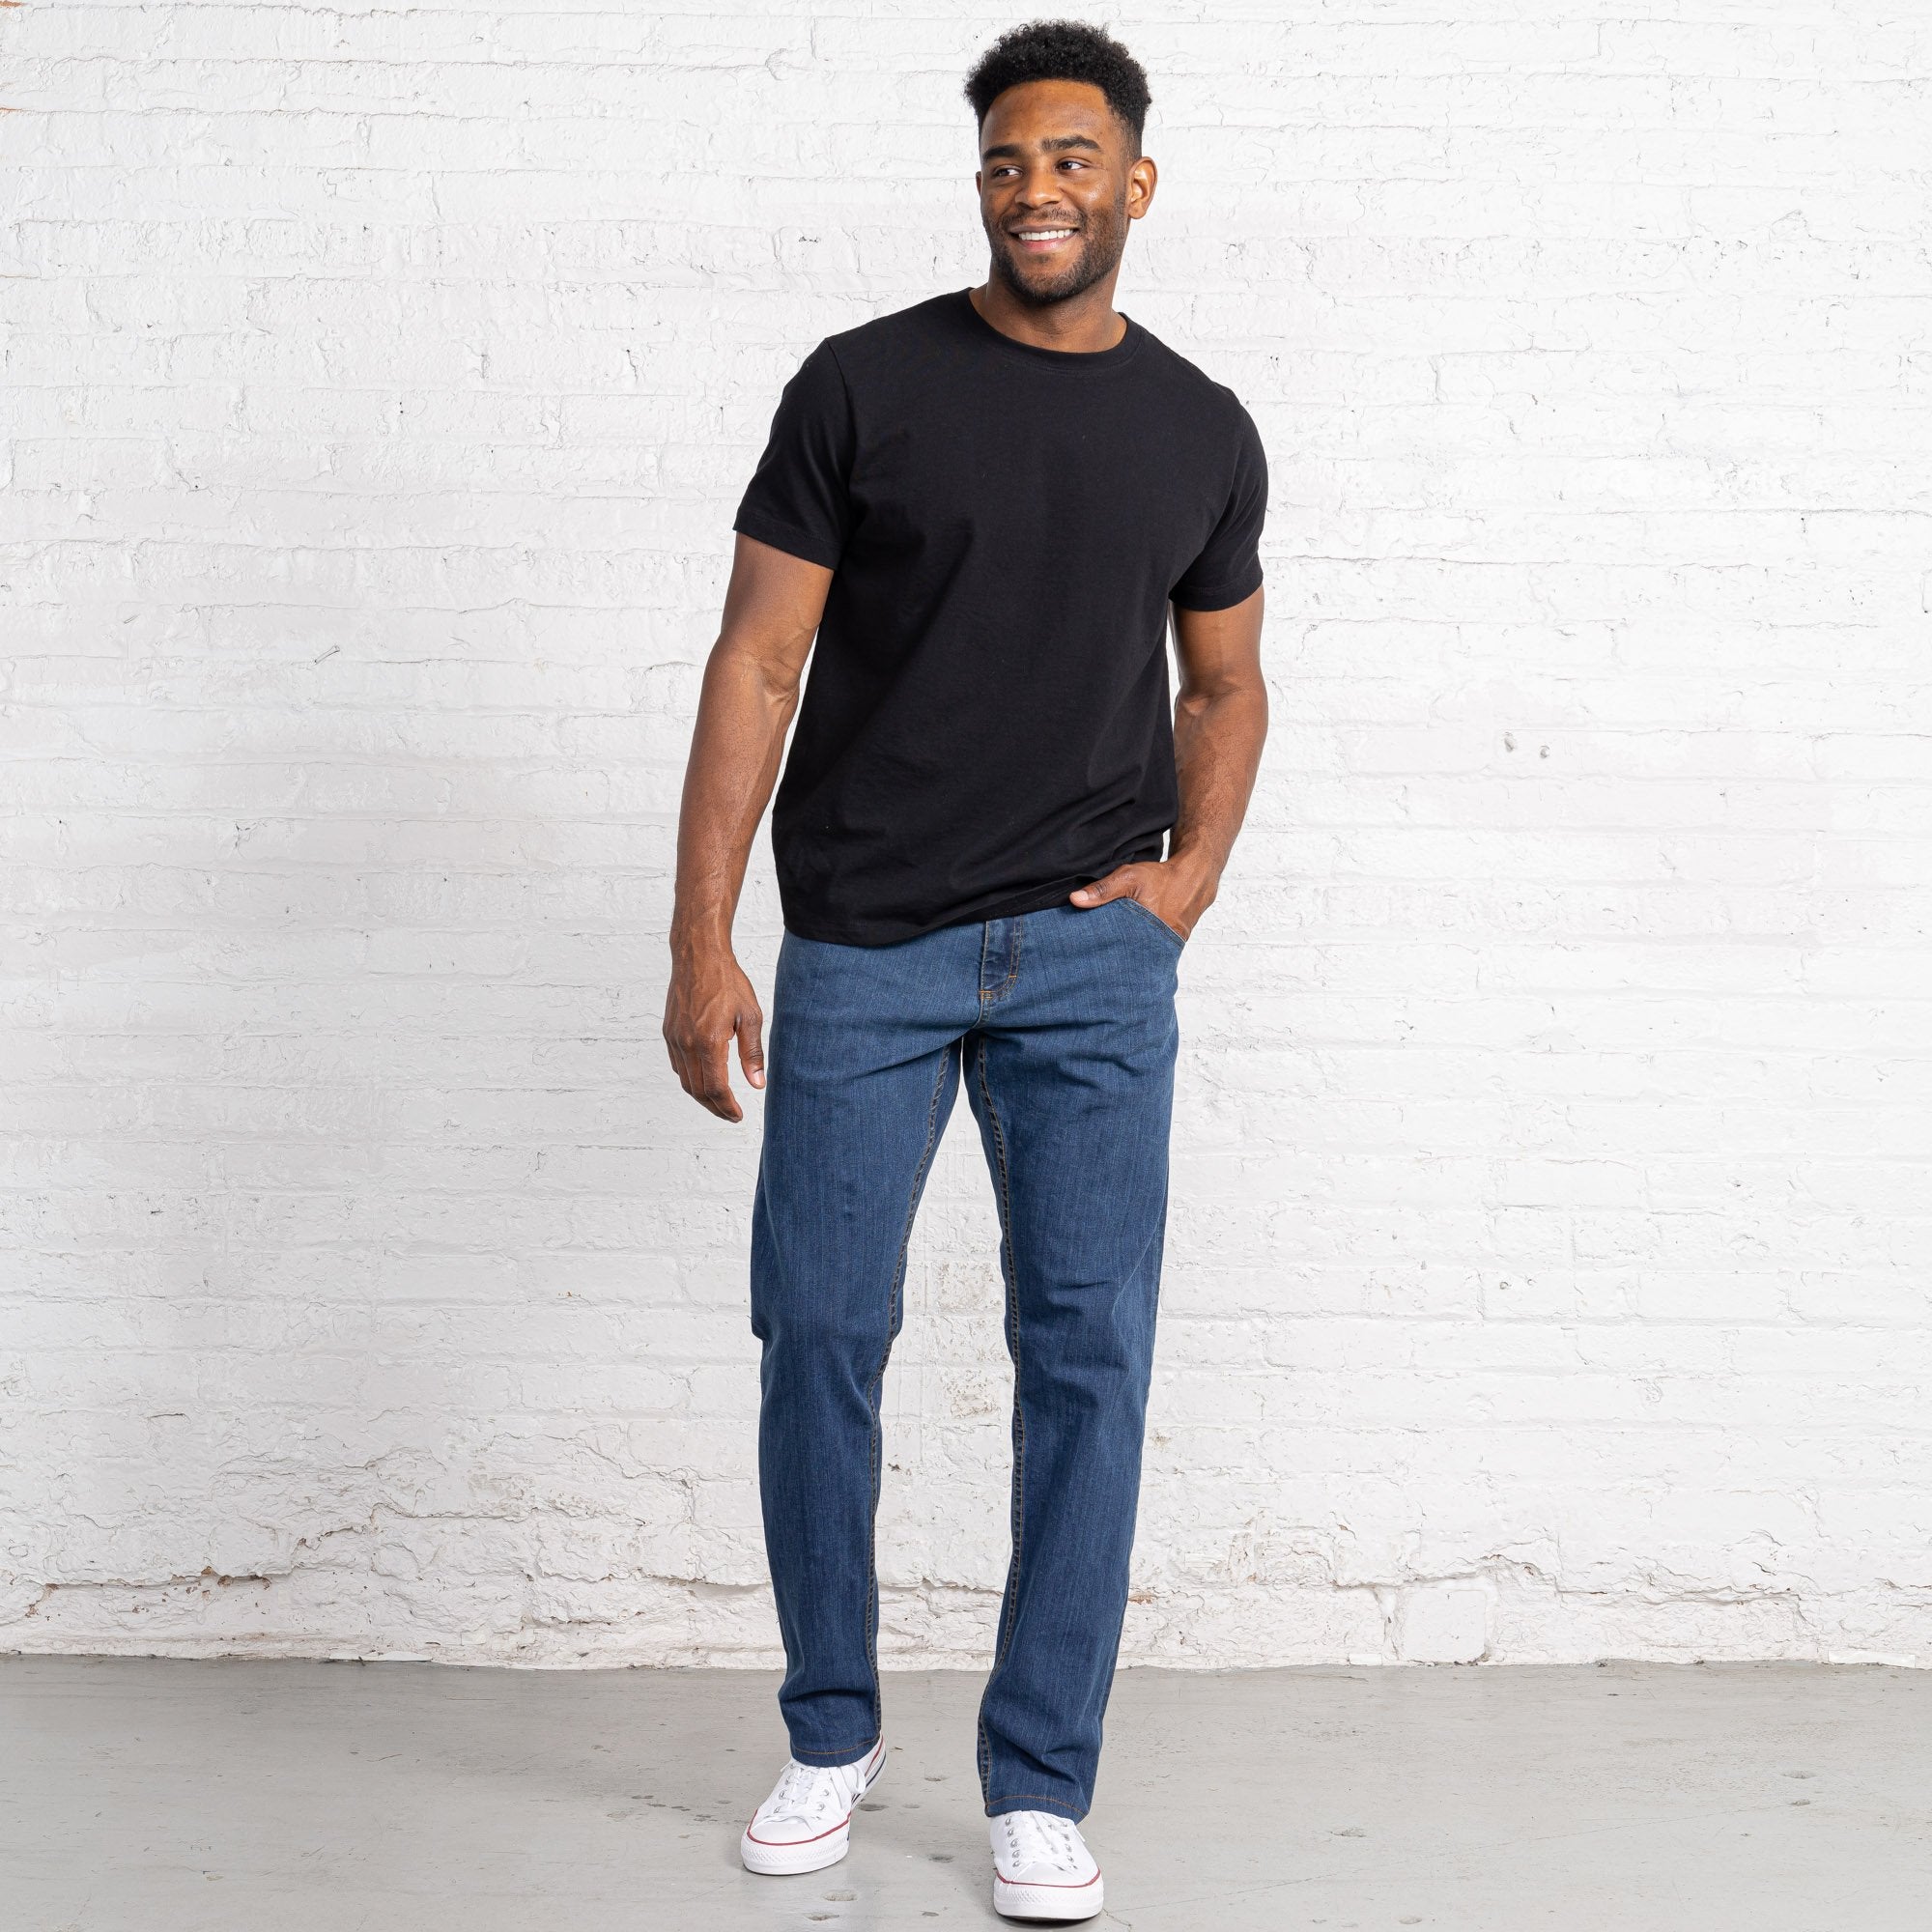 Mens Slim Fit Zipper Jeans With Pattern Print, Ripped Lightweight Denim  Pants With Motocross Knee Protection And Rips Straight Skinny Fit Style  260D From Ai790, $54.11 | DHgate.Com